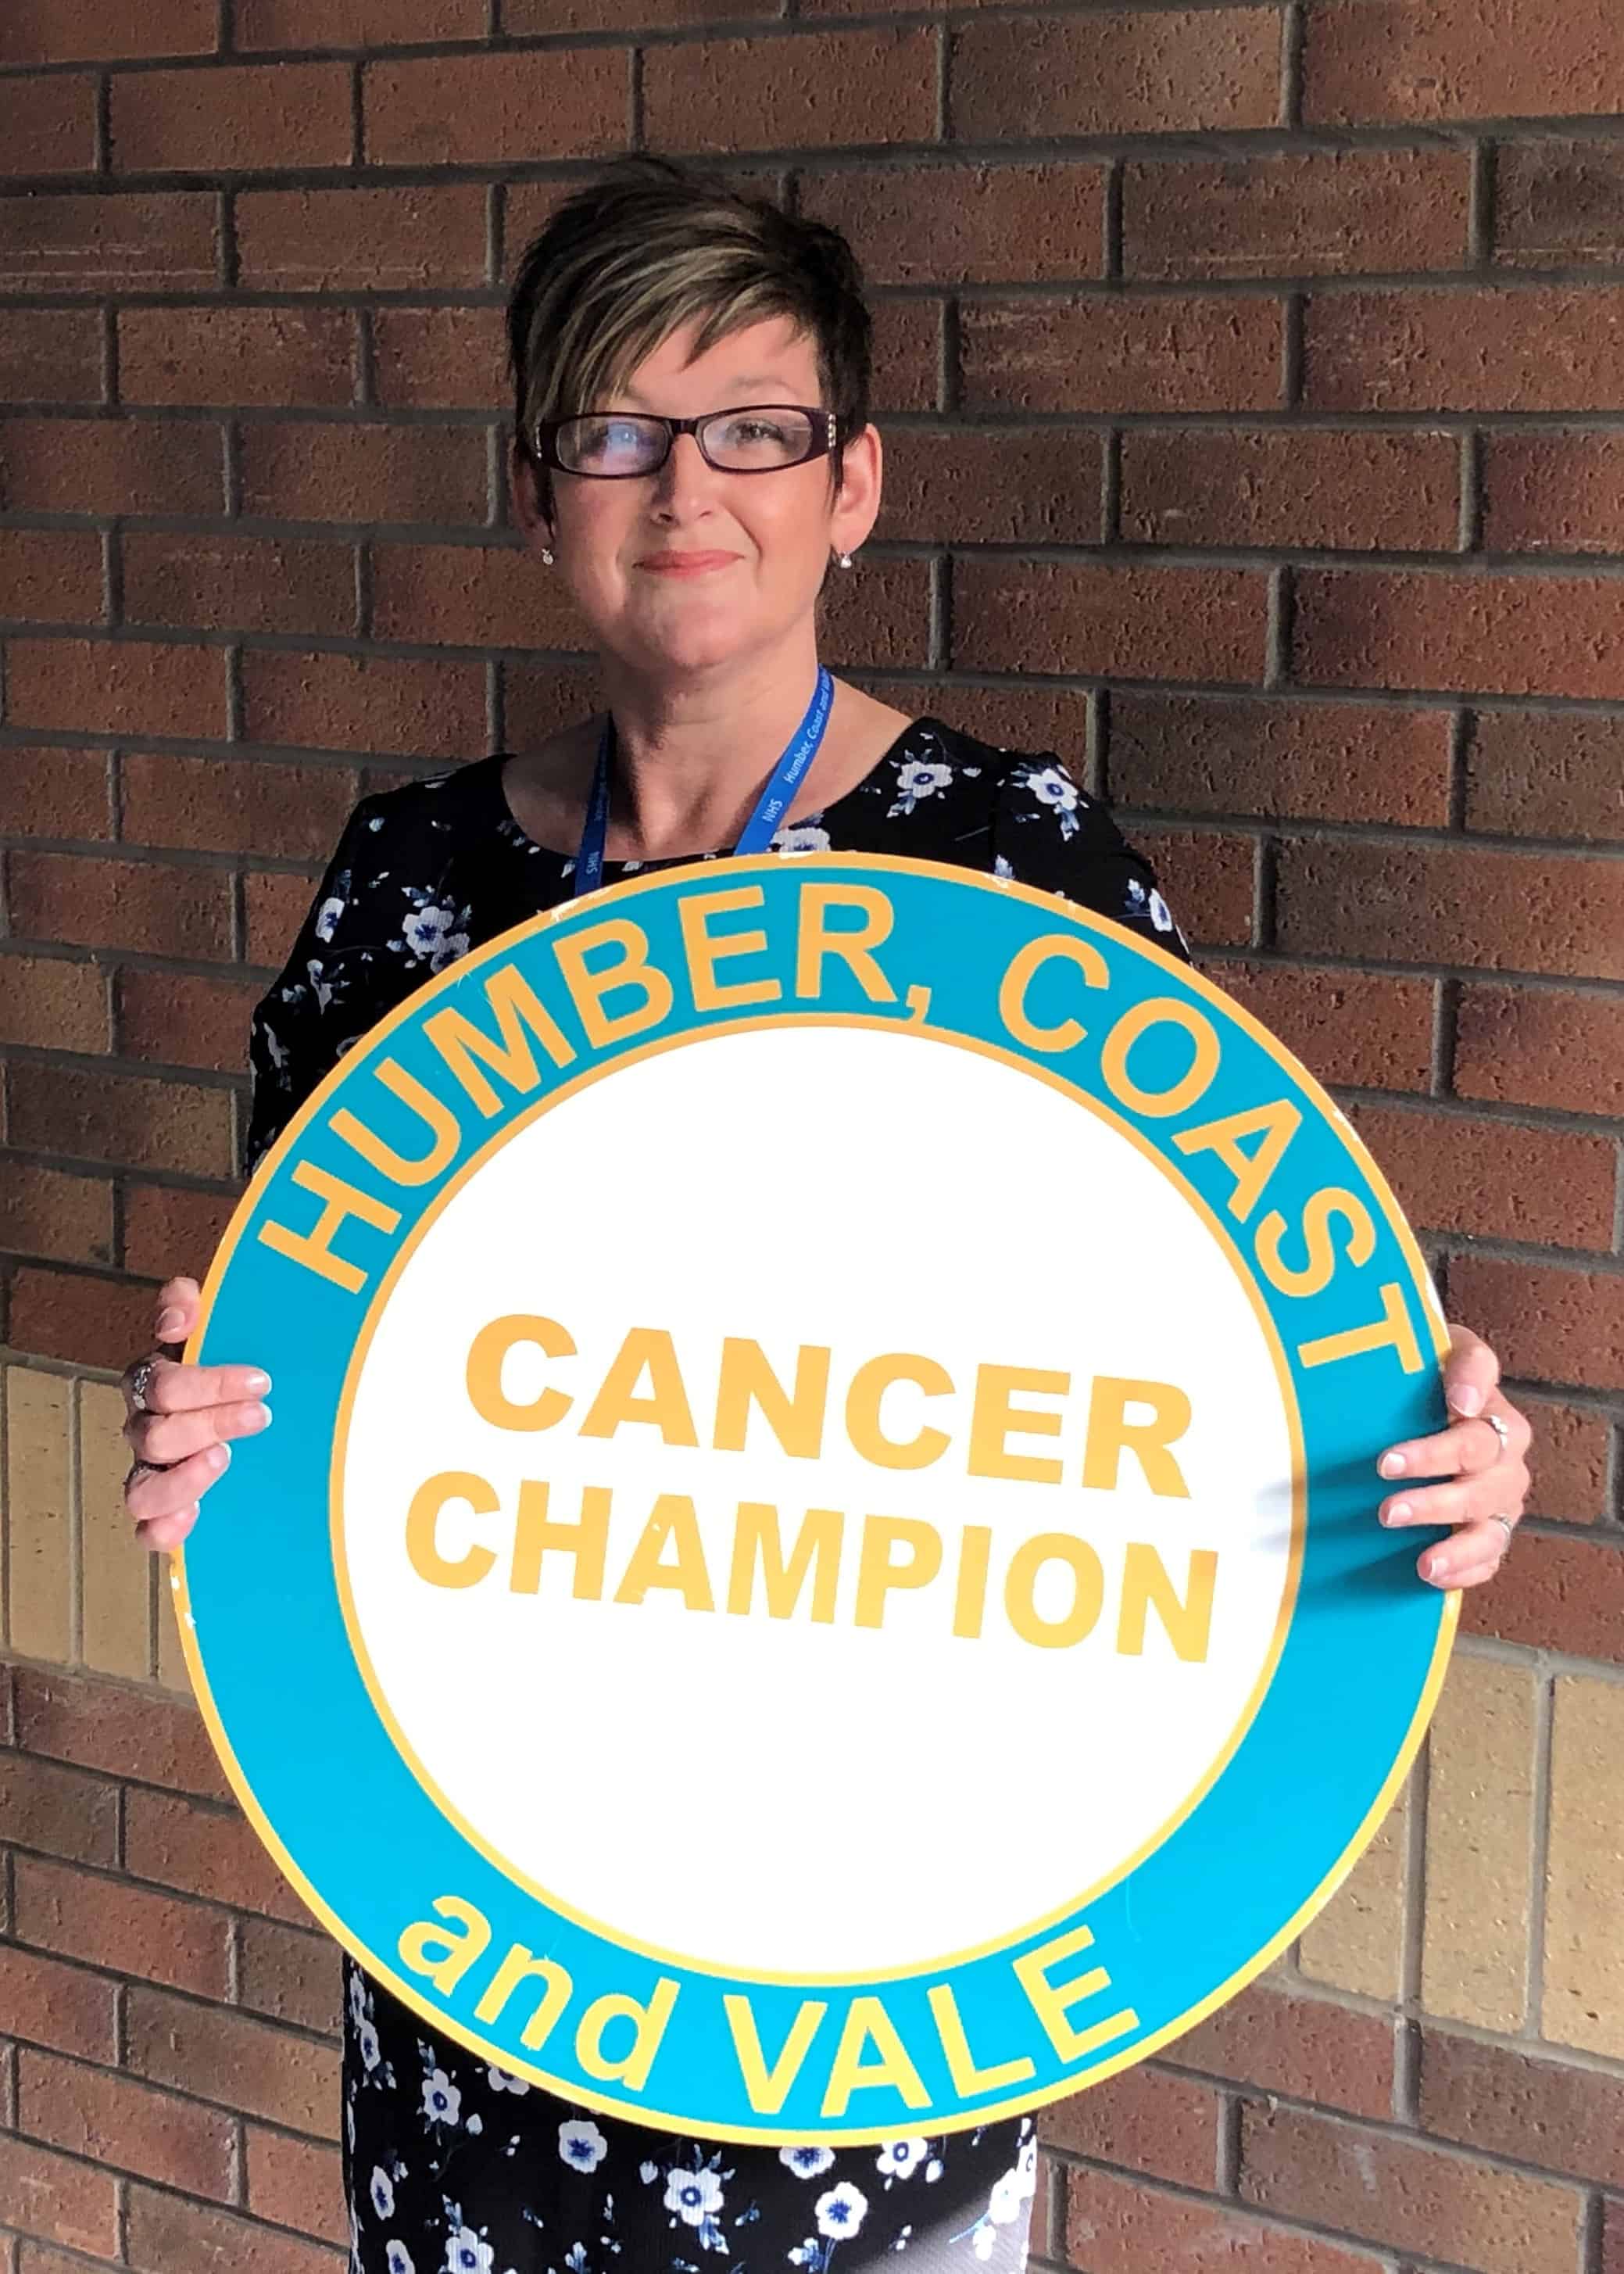 Photo of Sarah Patten stood in front of a brick wall. Sarah has short dark hair and is looking at the camera smiling. She is holding a photo prop which is of an enlarged Cancer Champion logo.